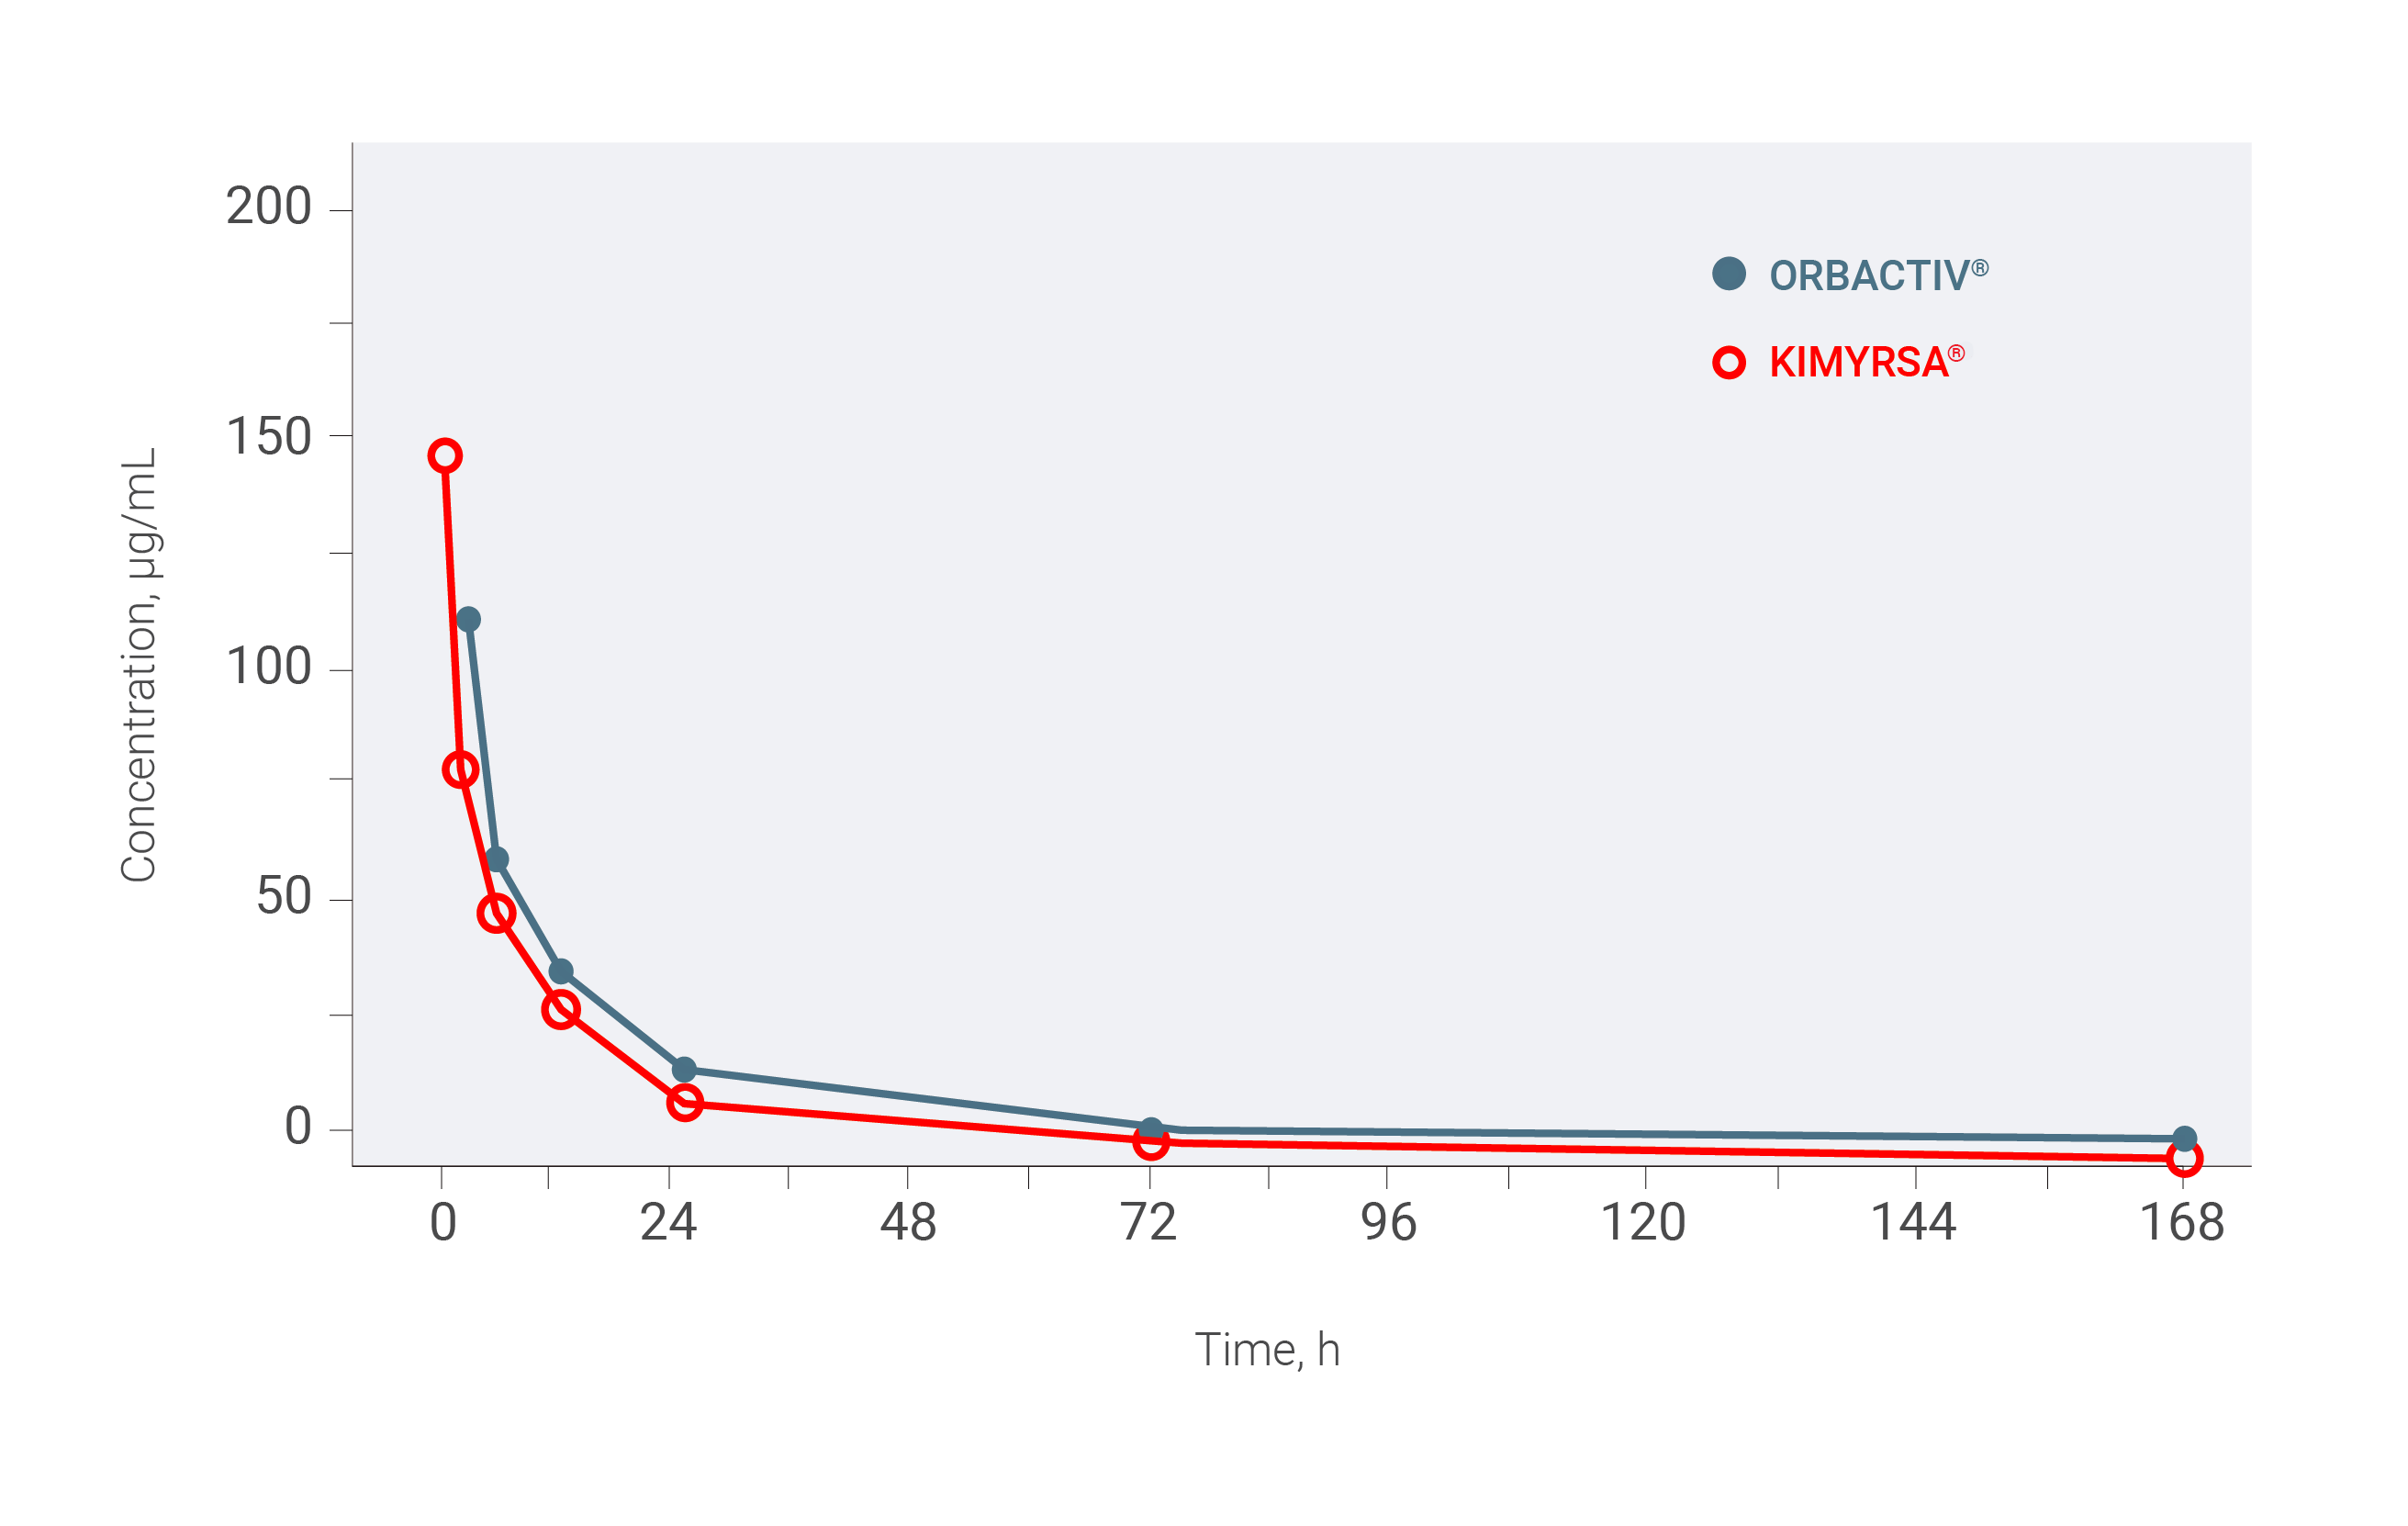 Linear scale of KIMYRSA® and ORBACTIV® pharmacokinetic study showing mean concentration of oritavancin over 168 hours in patients with ABSSSI.  Graph shows similar curves for ORBACTIV® and  KIMYRSA® over the 168 hour time period.